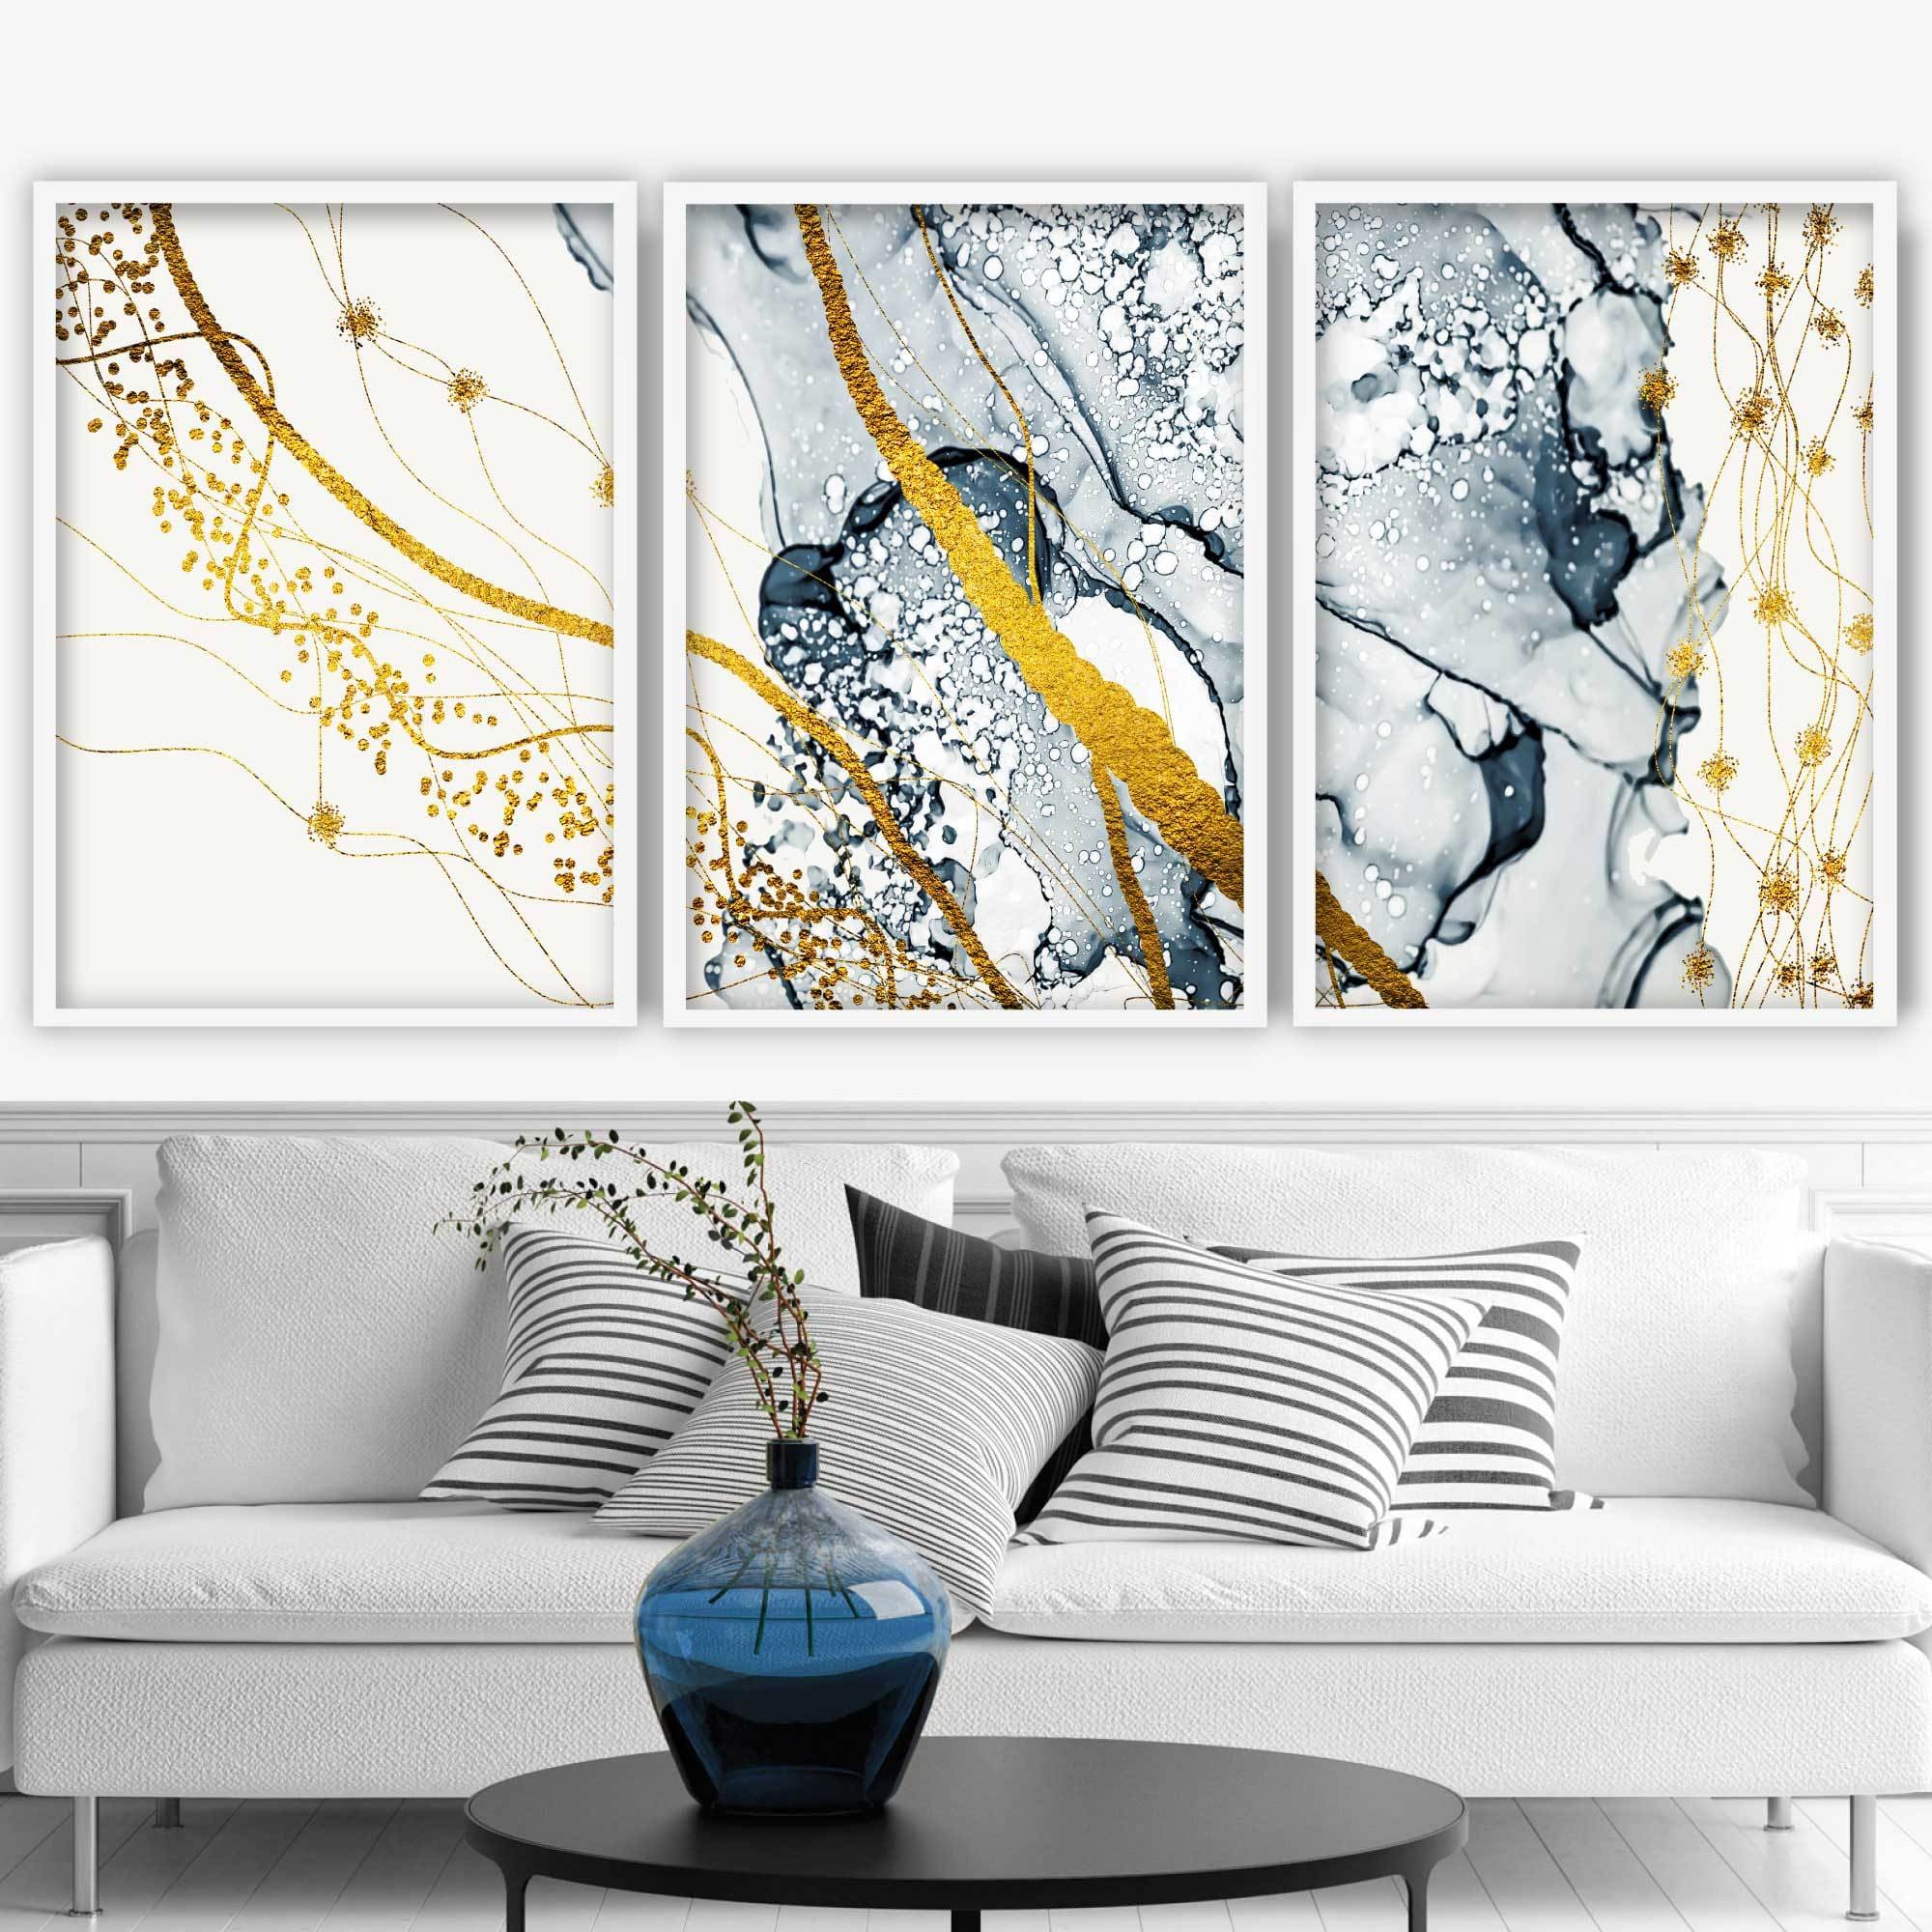 Set of 3 Navy & Yellow Gold Abstract Art Prints